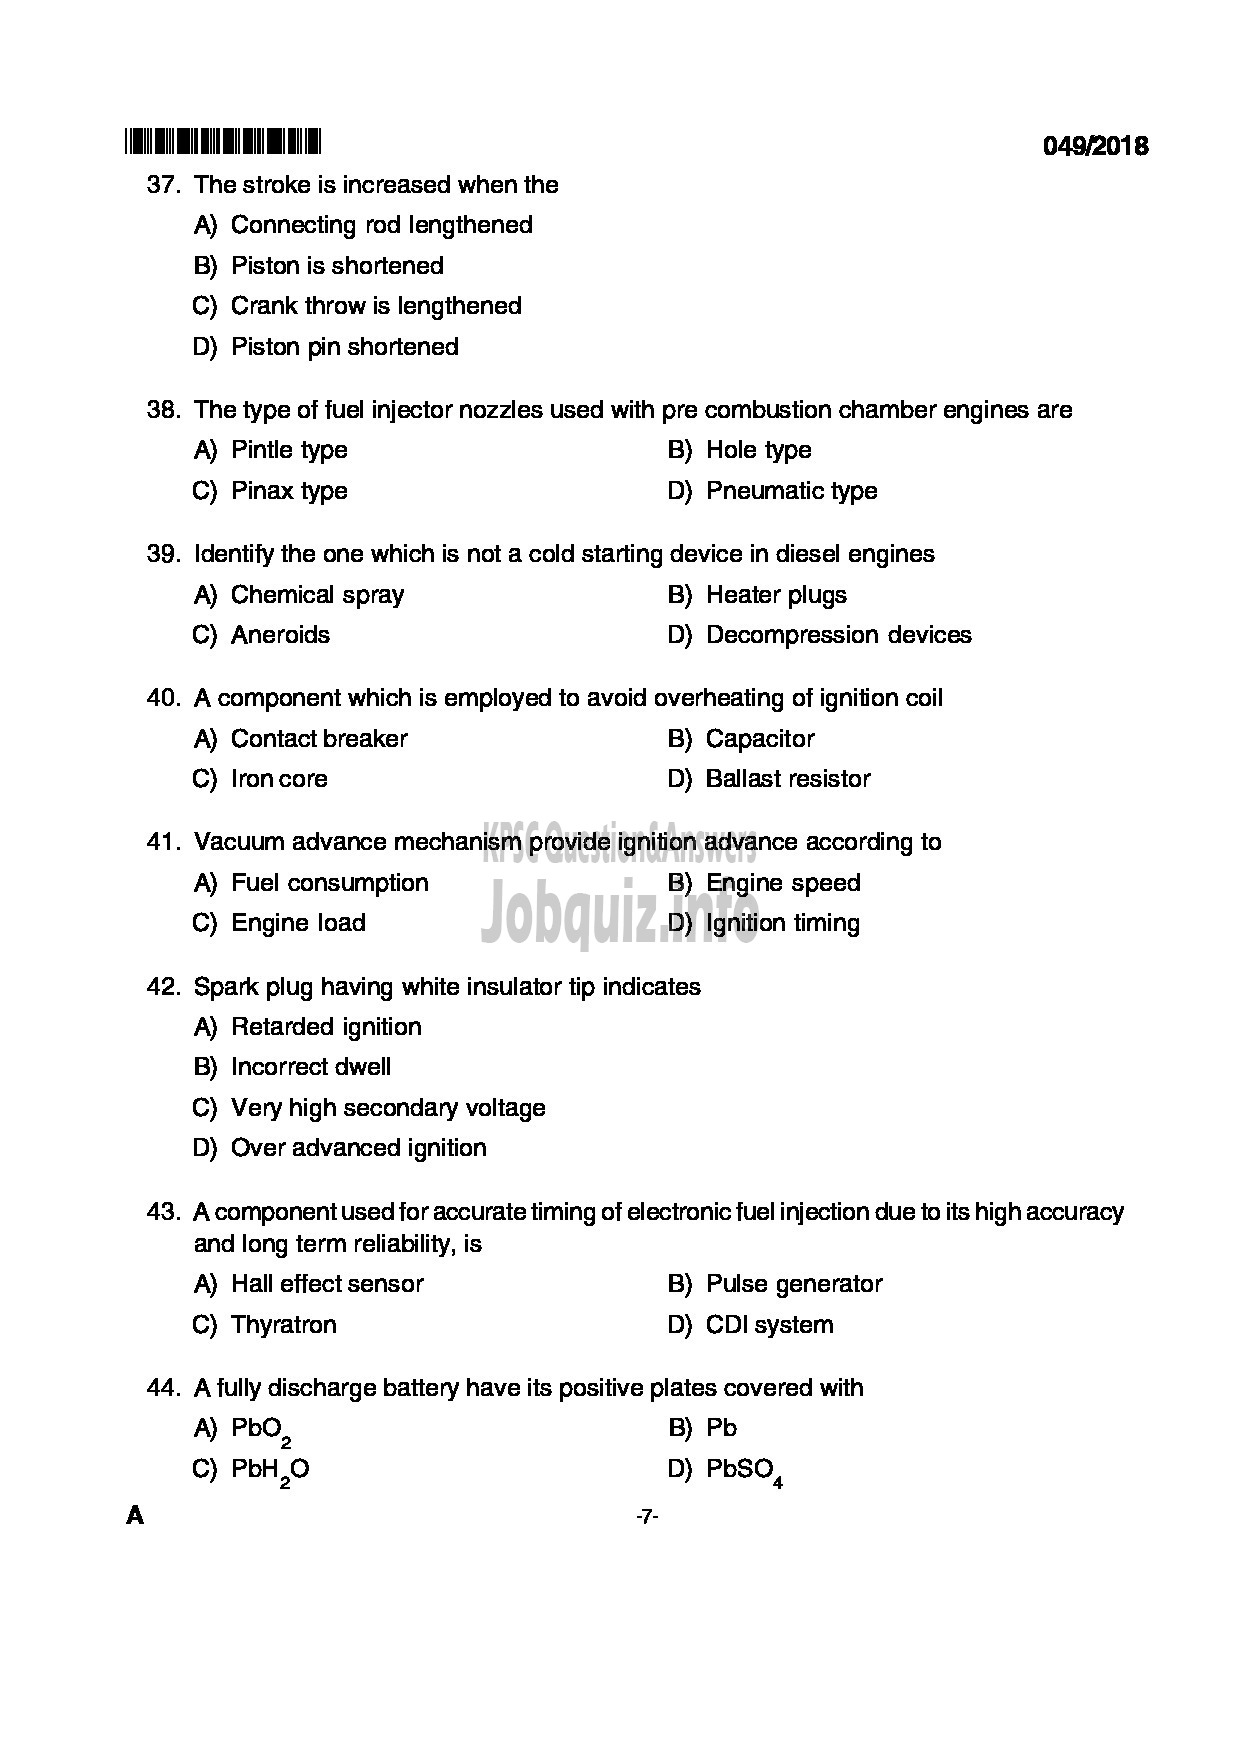 Kerala PSC Question Paper - VOCATIONAL INSTRUCTOR IN MAINTENANCE AND REPAIRS OF AUTOMOBILES VOCATIONAL HIGHER SECONDARY EDUCATION-7